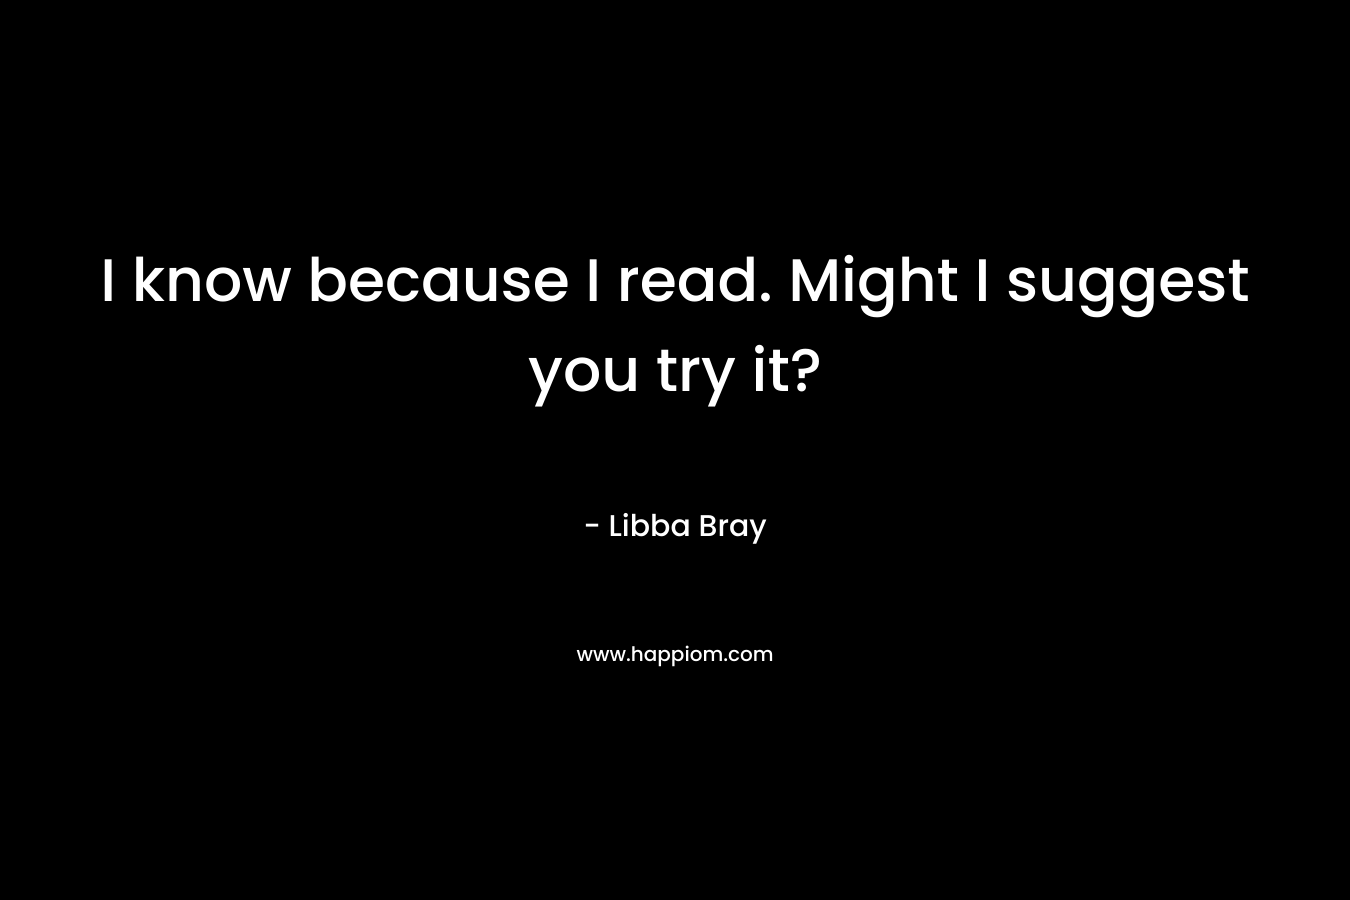 I know because I read. Might I suggest you try it?